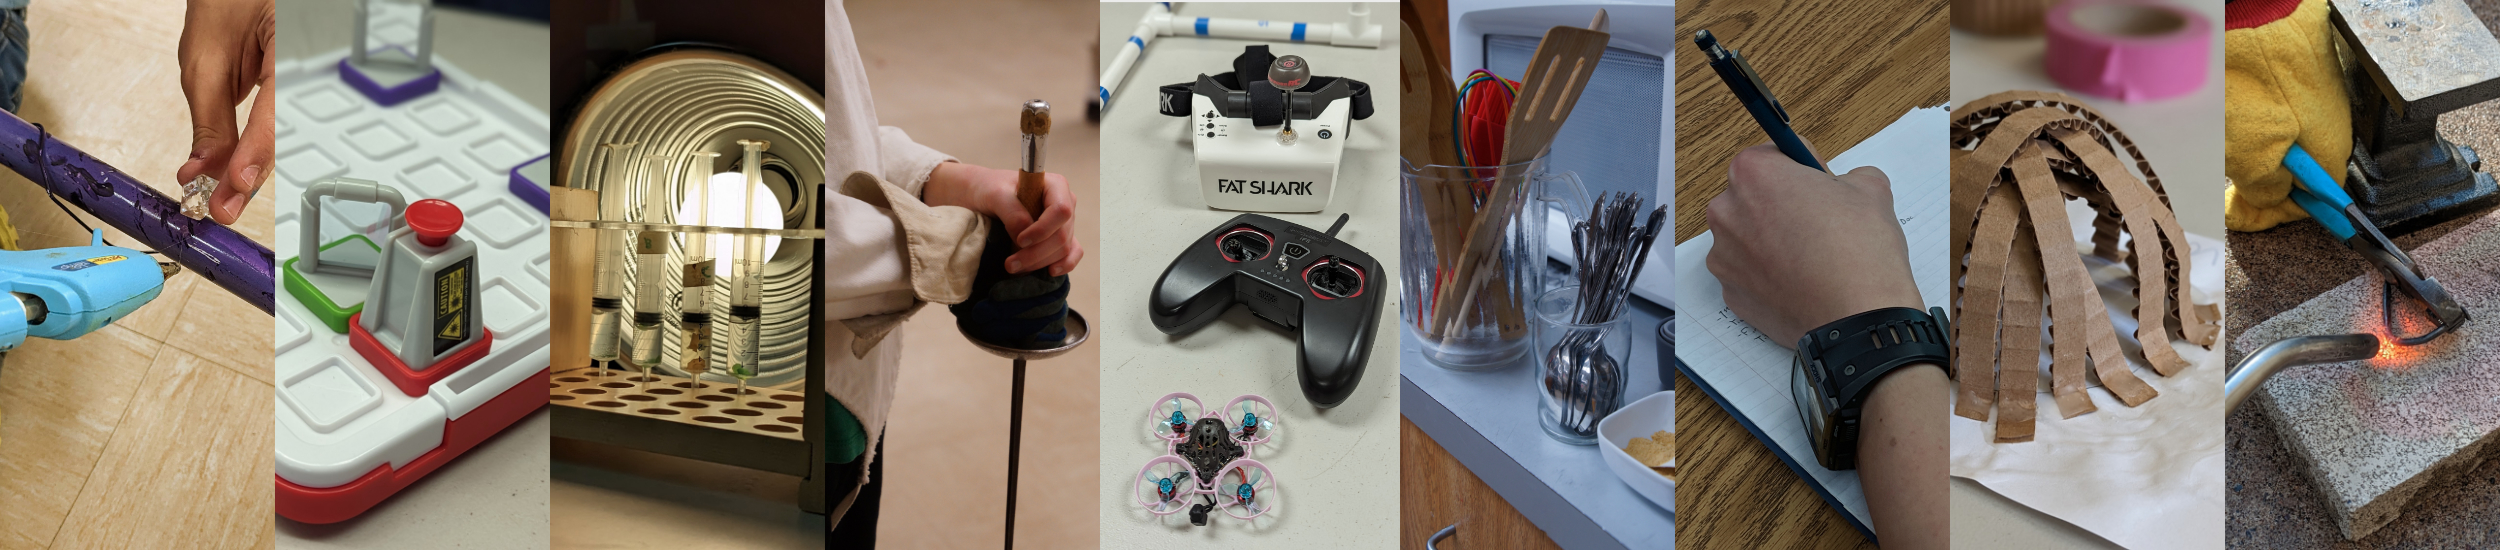 student hot glues a crystal to a staff, table top game, backlit biology experiment, students stands holding a foil, FPV goggles, transmitter and tiny whoop drone, cooking utensils, student's handing w